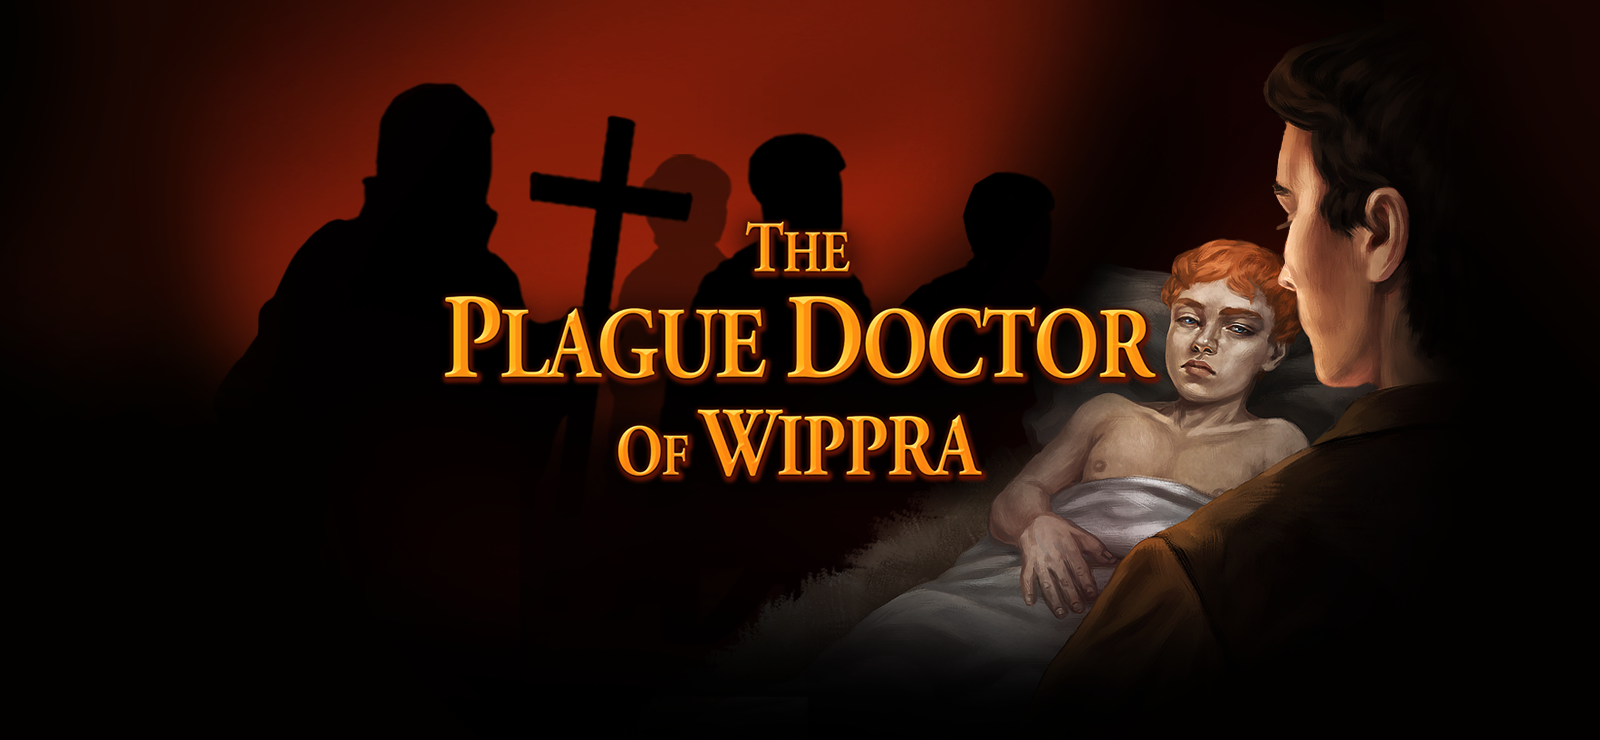 The Plague Doctor Of Wippra